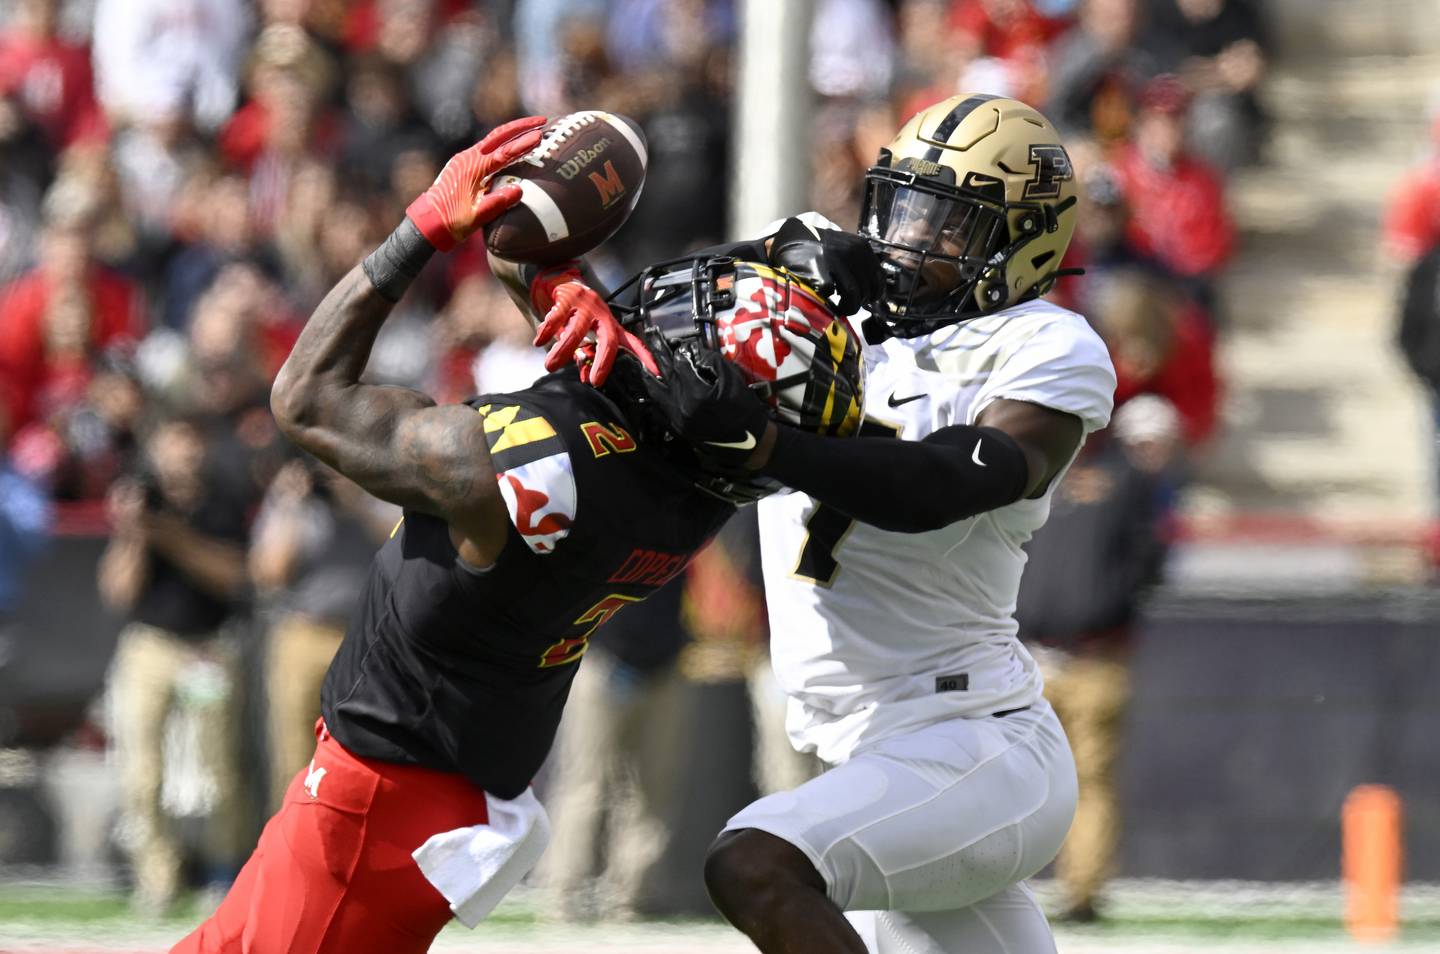 Jacob Copeland of the Maryland Terrapins makes a catch in the second quarter against Jamari Brown of the Purdue Boilermakers at SECU Stadium on in College Park.